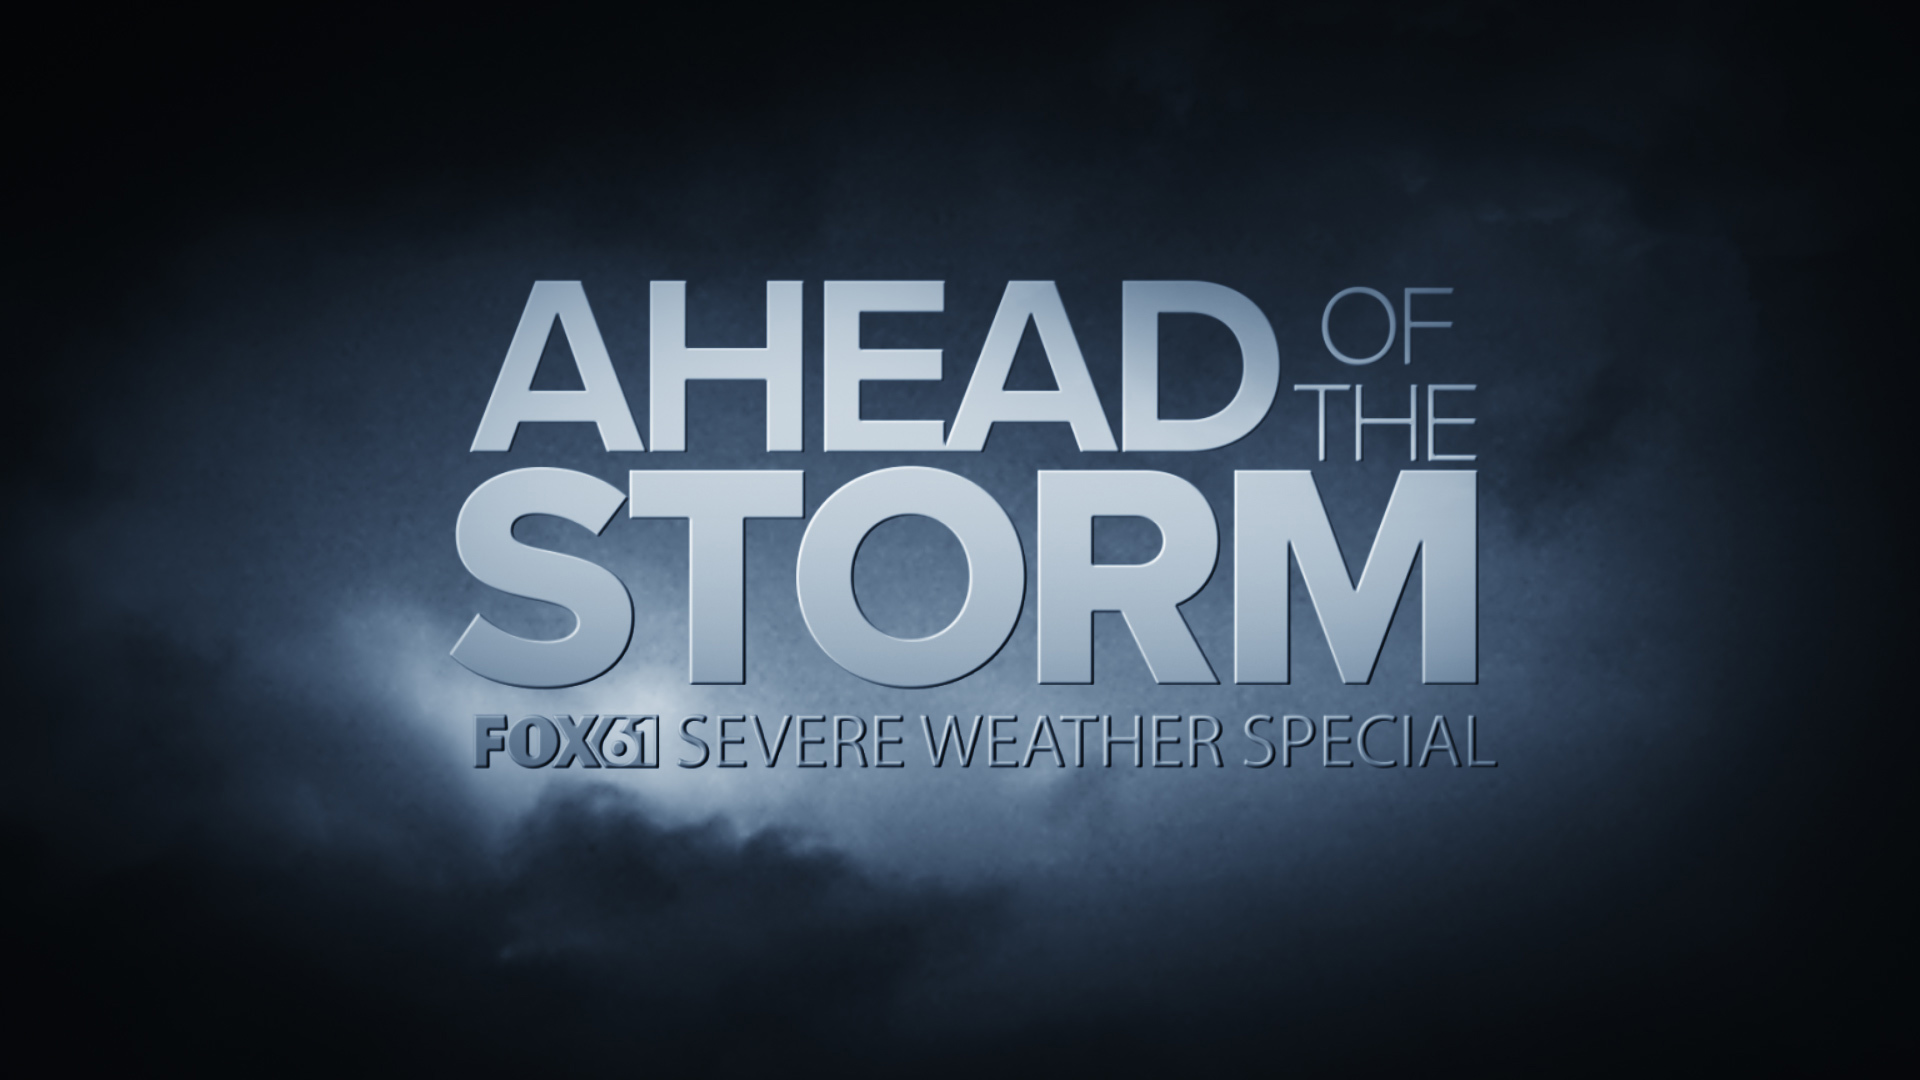 FOX61 is getting you prepared ahead of the storm. Your home, to your car. On the roads, to your backyard. It takes team coverage.